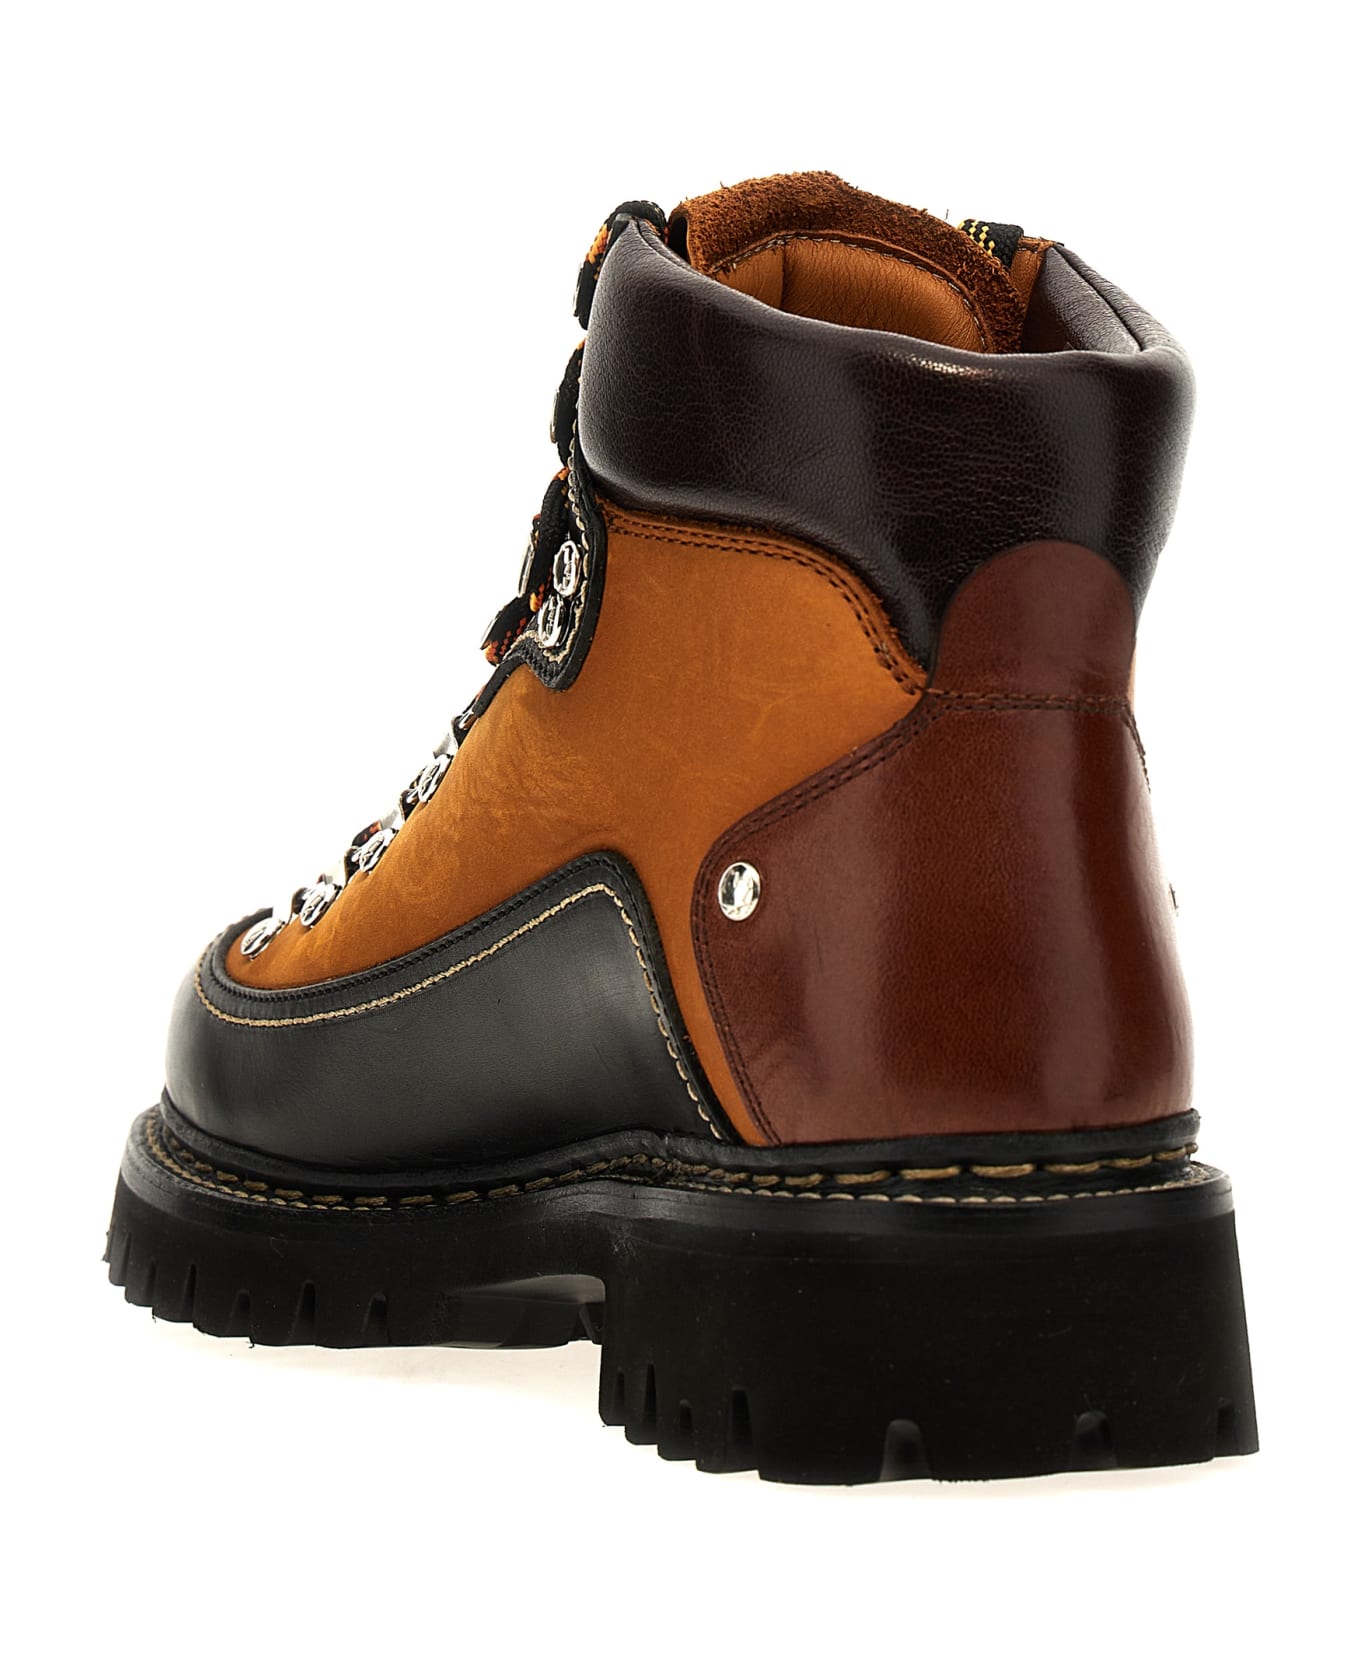 Dsquared2 Canadian Hiking Boots - Brown